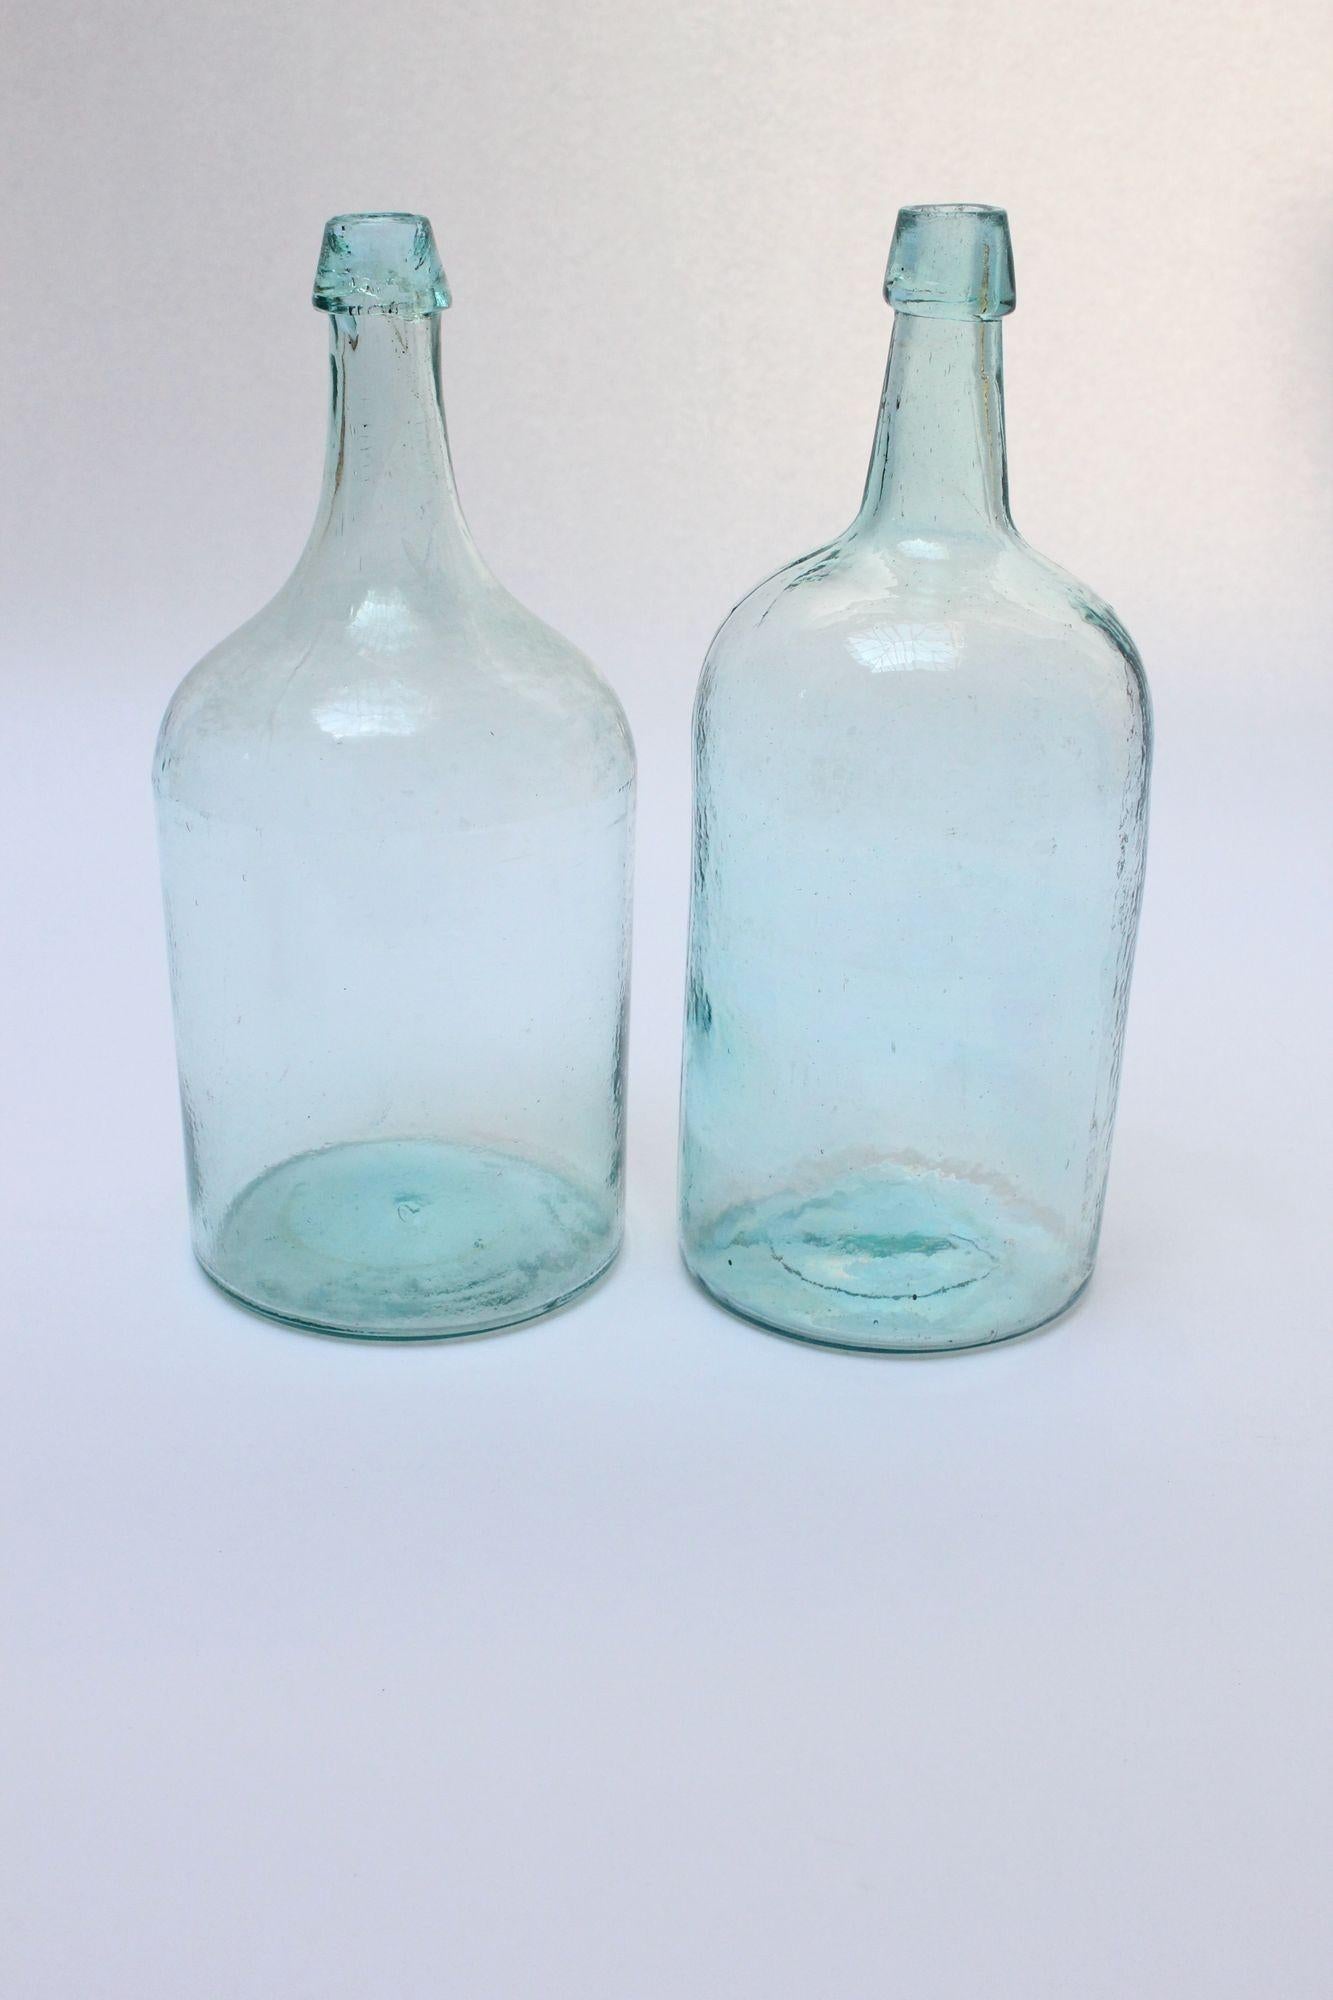 Set of two American ca. 1910 spirits/wine bottles, both aqua/turquoise tinted with hand-finished details. 
The one on the left was made via dip molding, evidenced by the glass discontinuity formed by the top of the dip mold. 
The one on the right